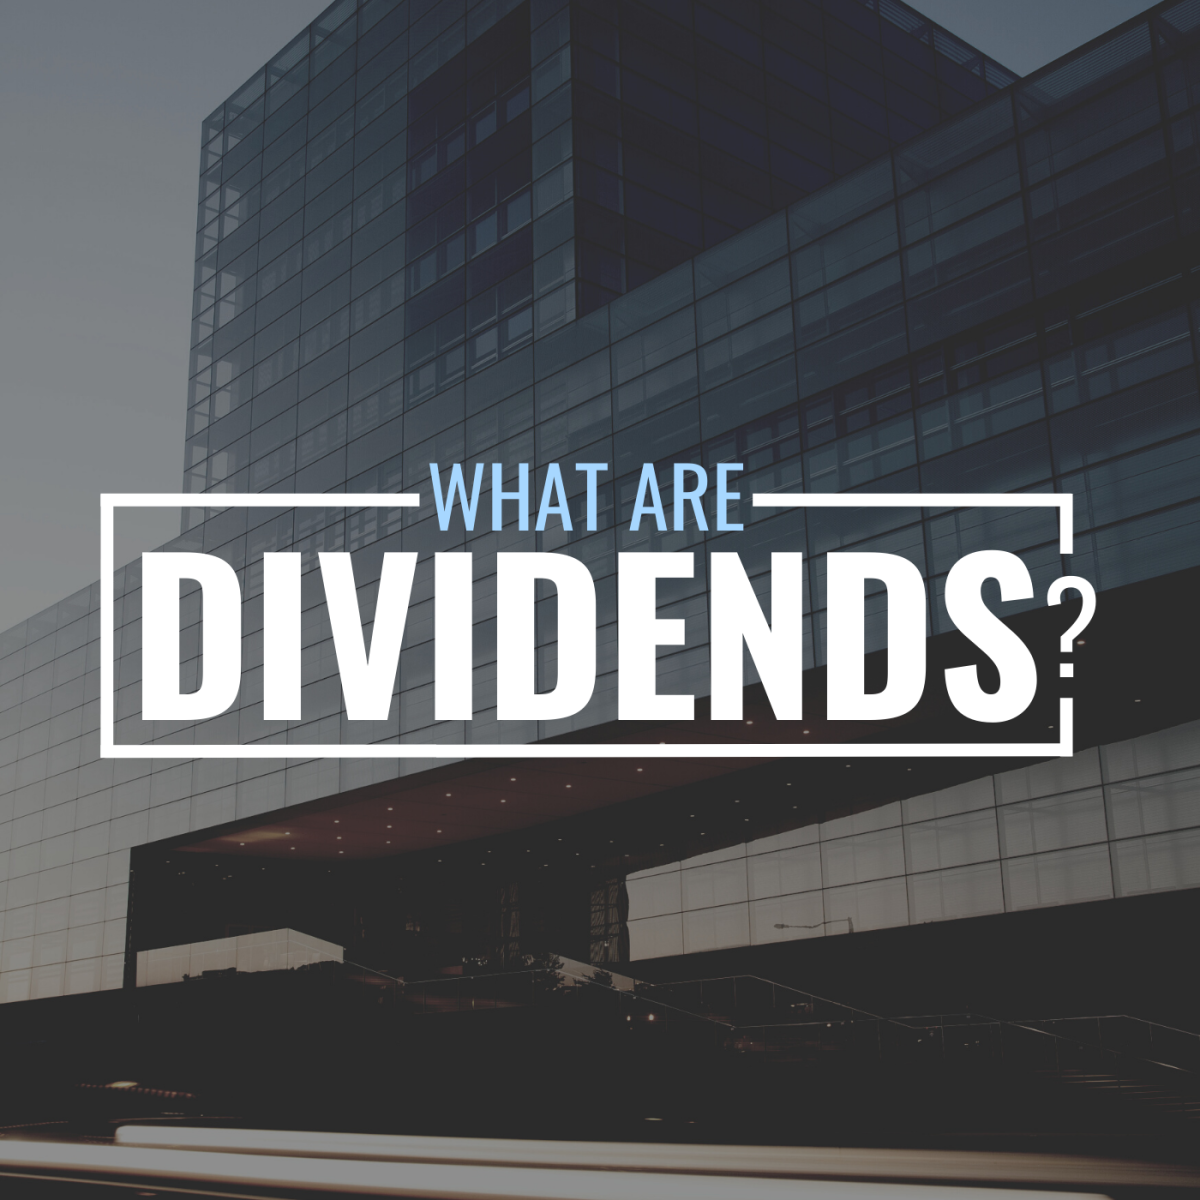 Darkened photo of a large office building with stylized text overlay that reads "What Are Dividends?"